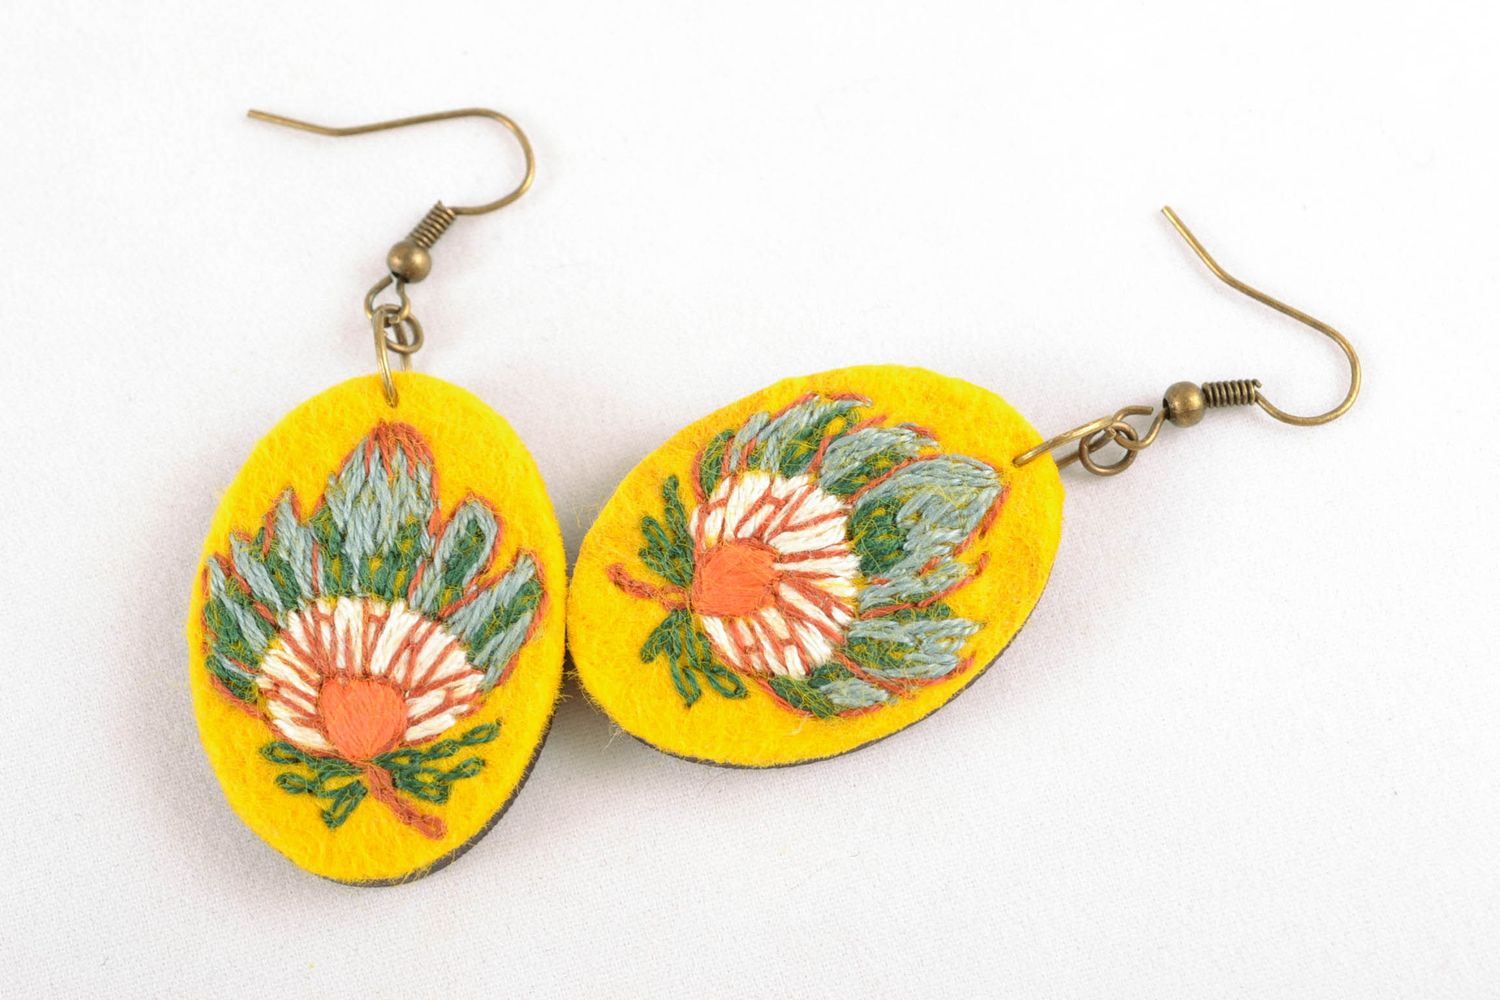 Handmade wooden and felt earrings with embroidery photo 3